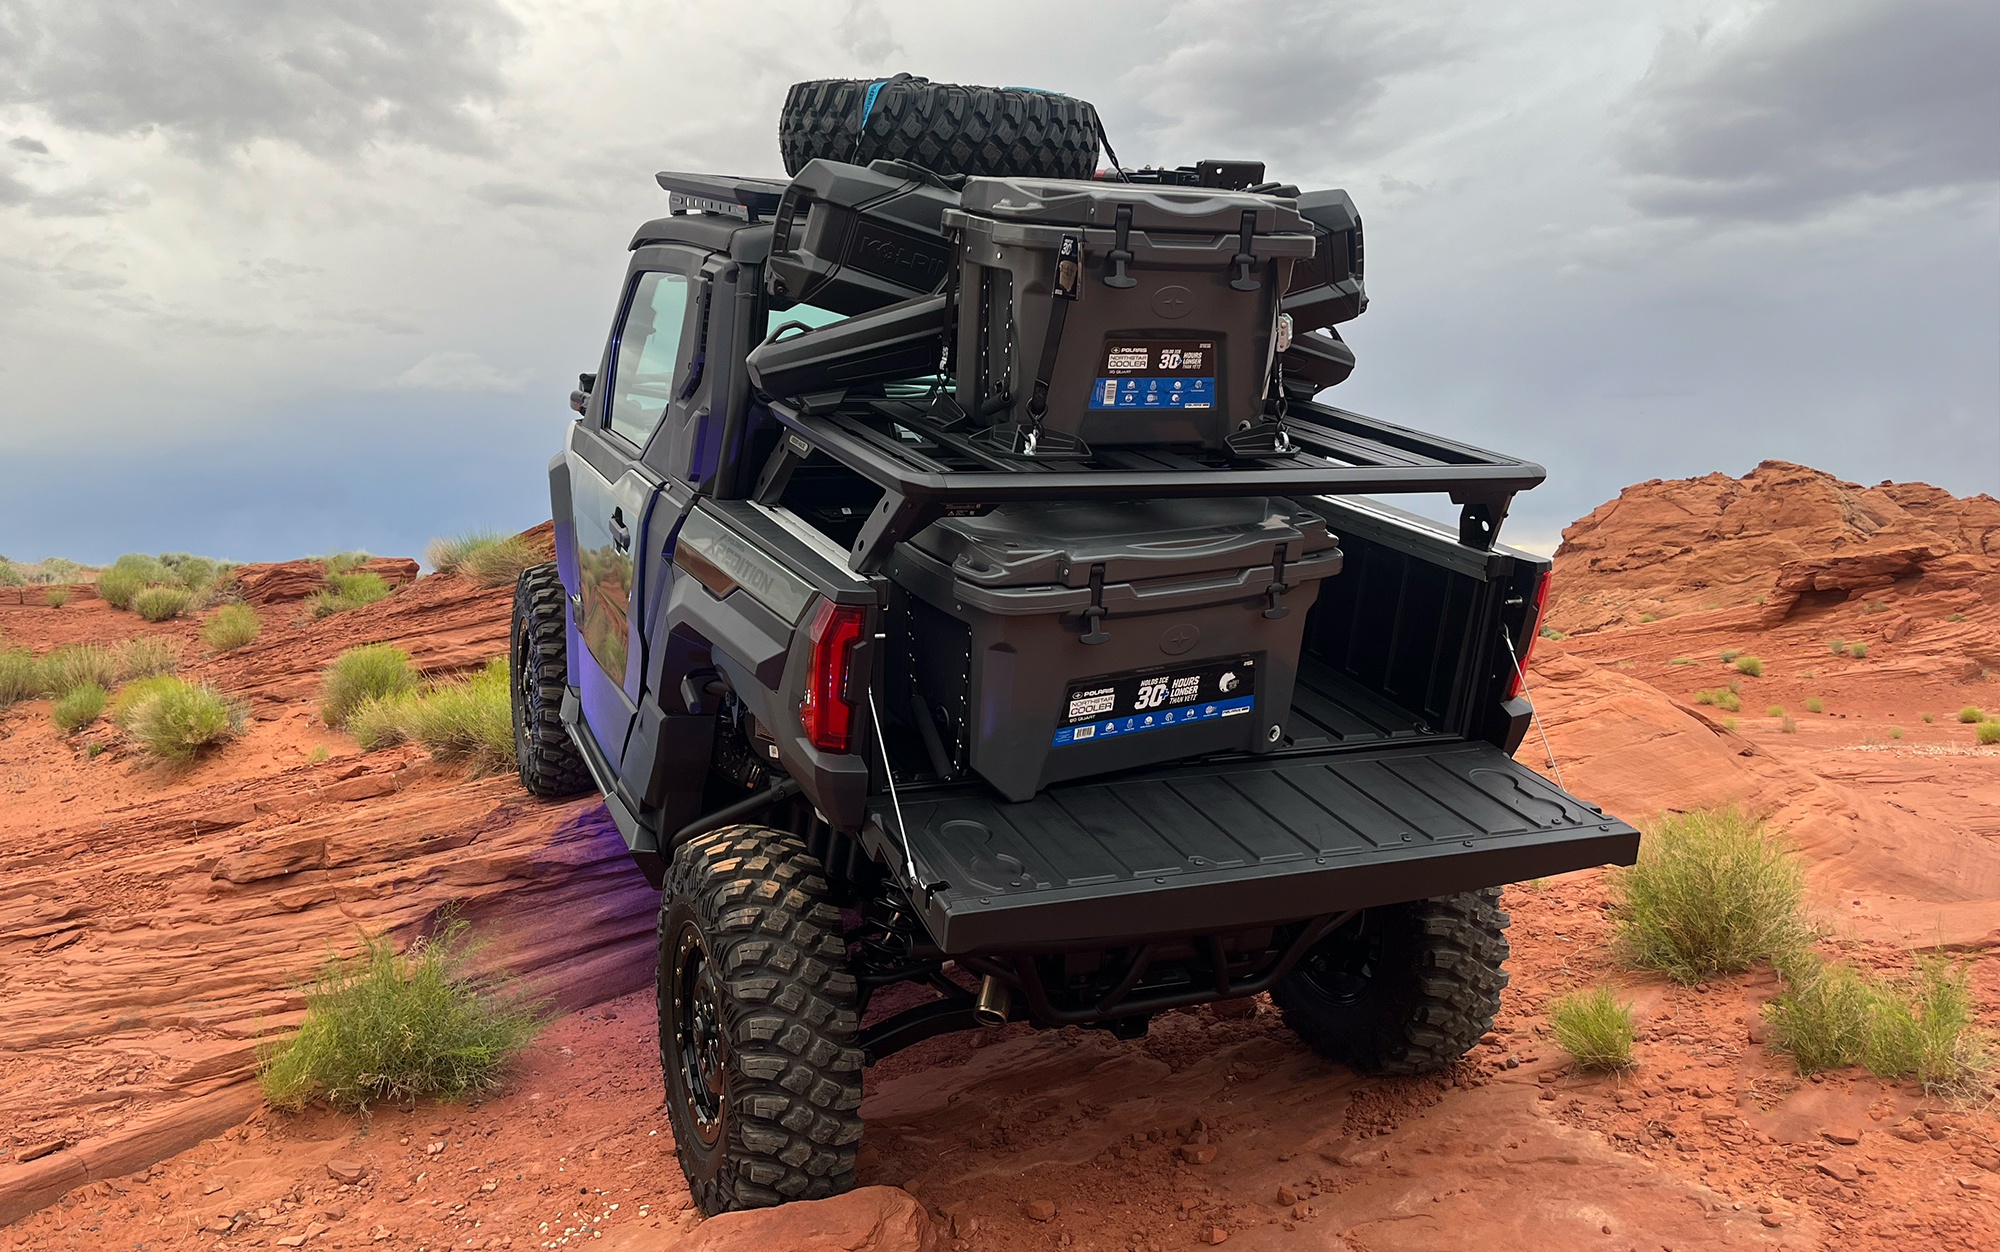 The roof and bed rack provide maximum storage on the two-seater Xpedition ADV. 